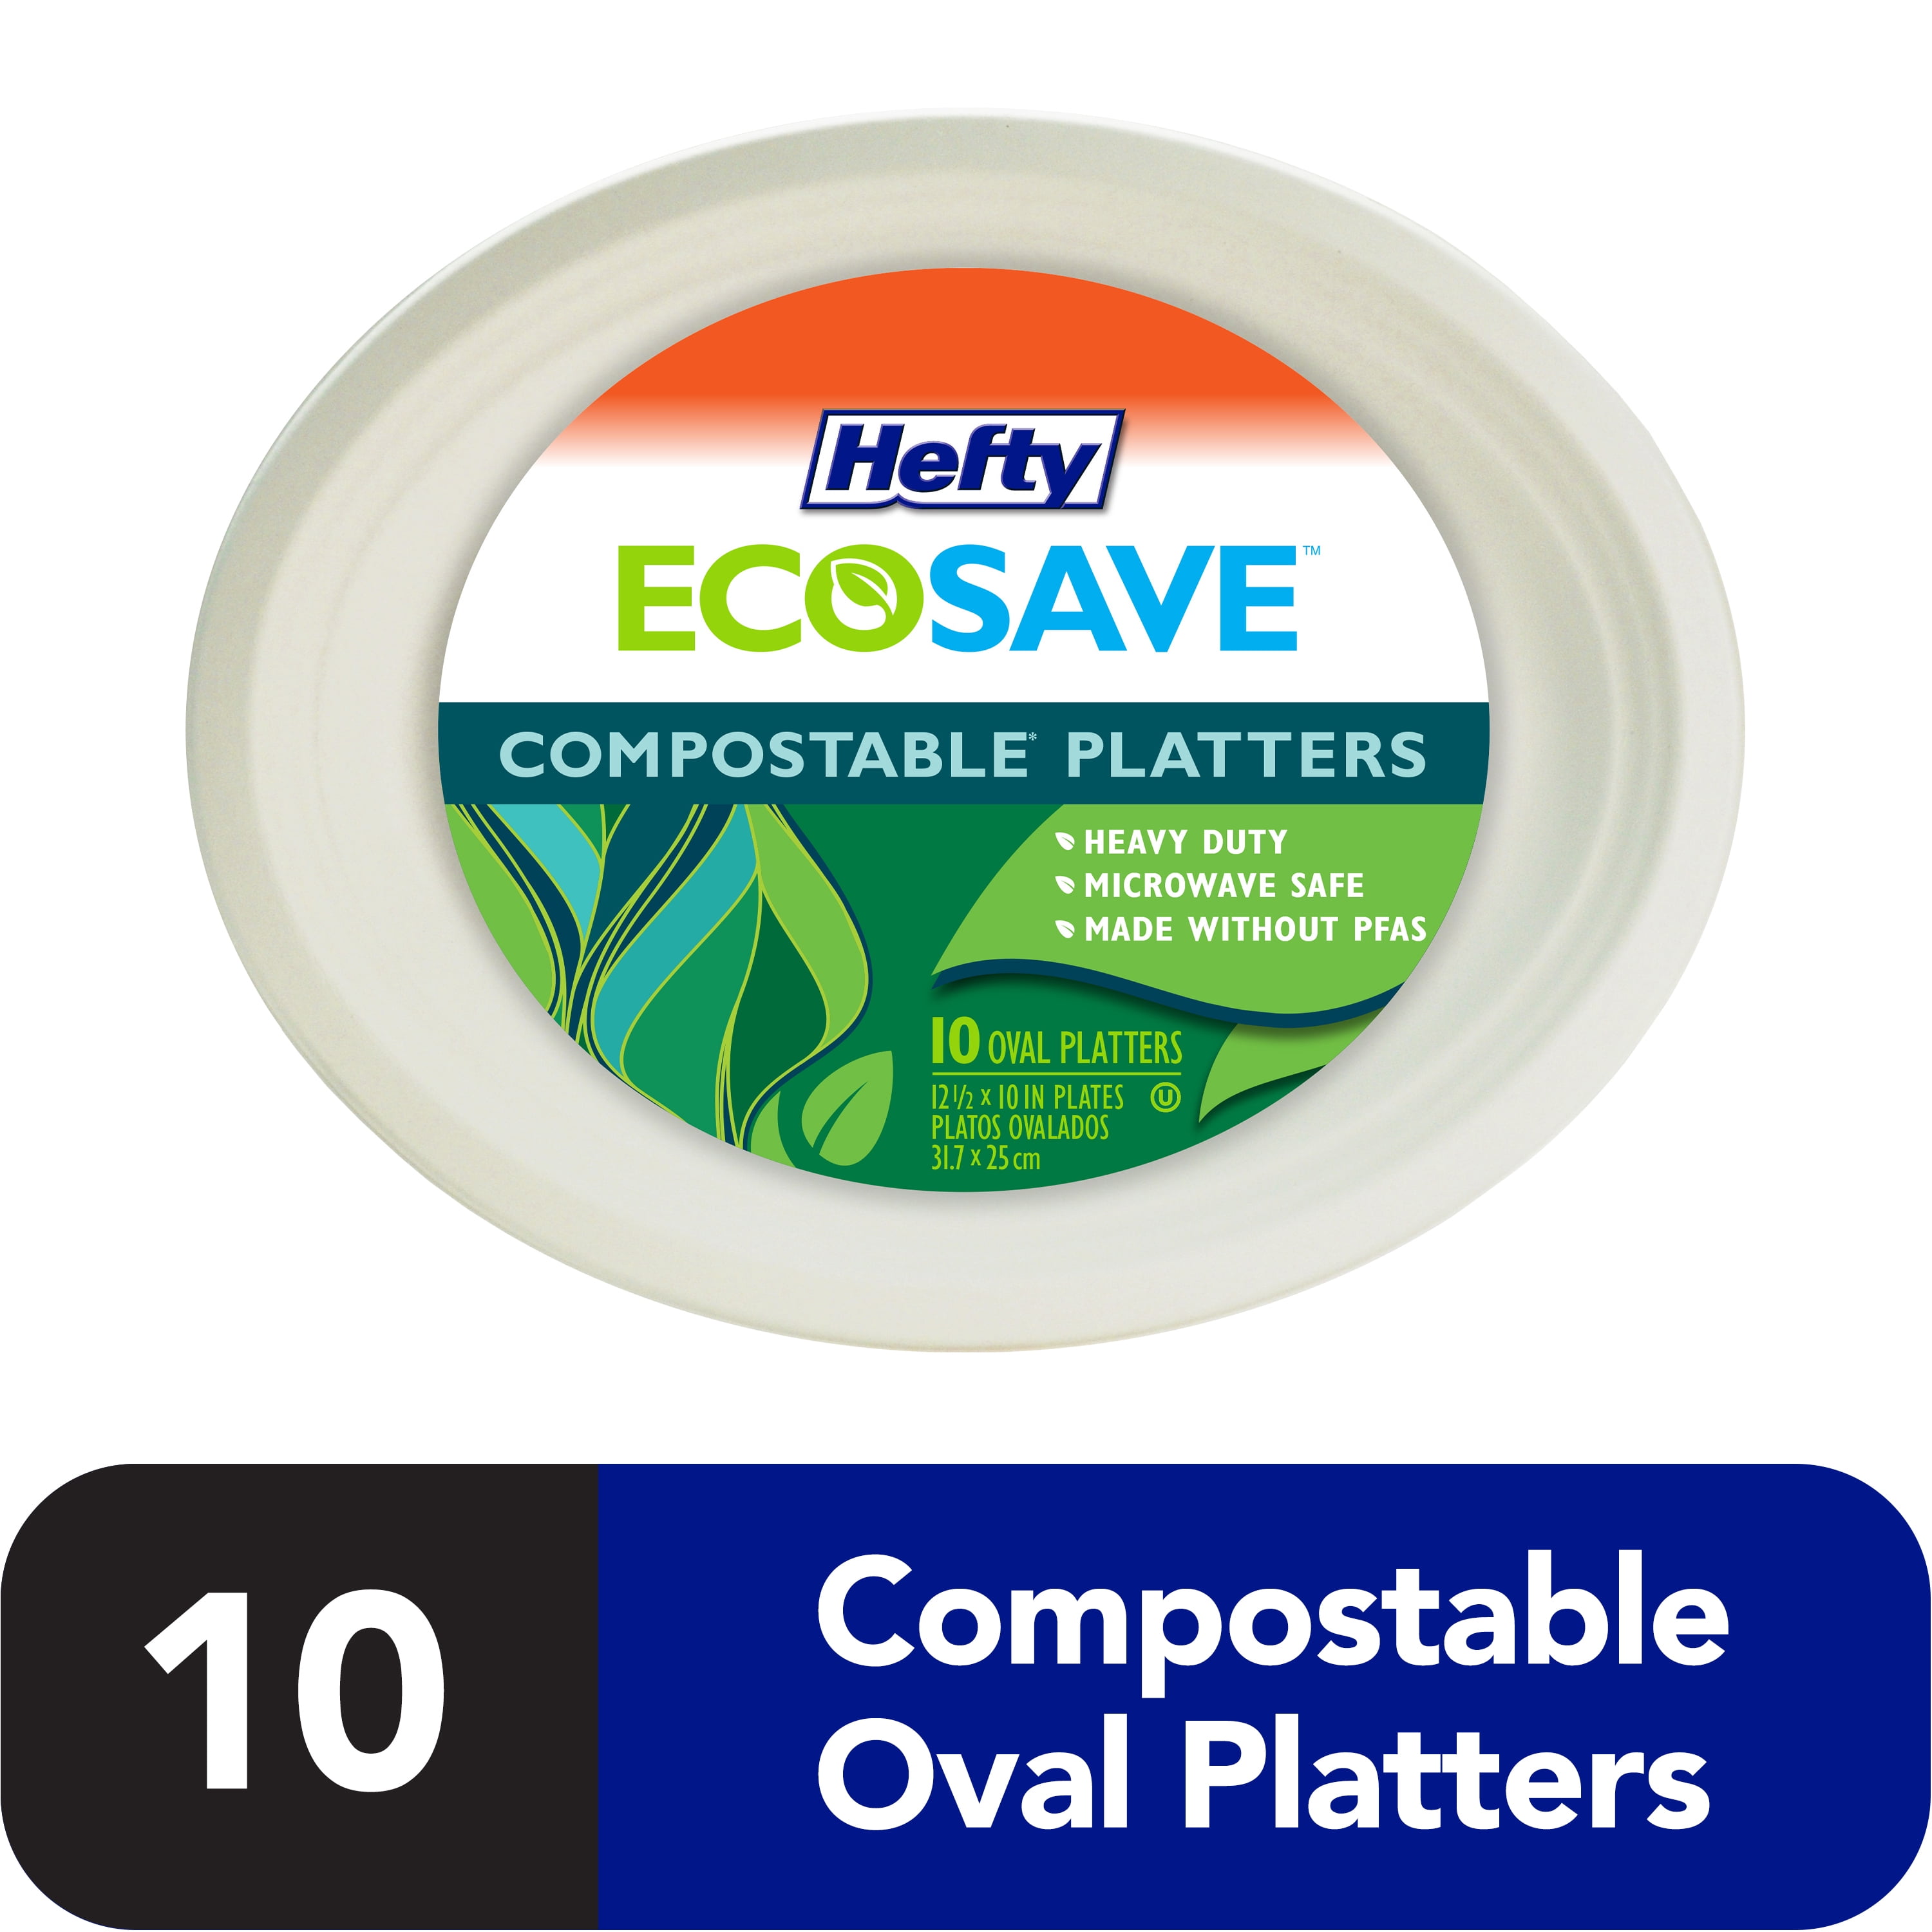 Oval Paper Plates 60 Pack, Large Paper Plates 12 inch, 100% Compostable Paper Plates Eco Friendly Disposable Plates, Super Strong Sturdy Paper